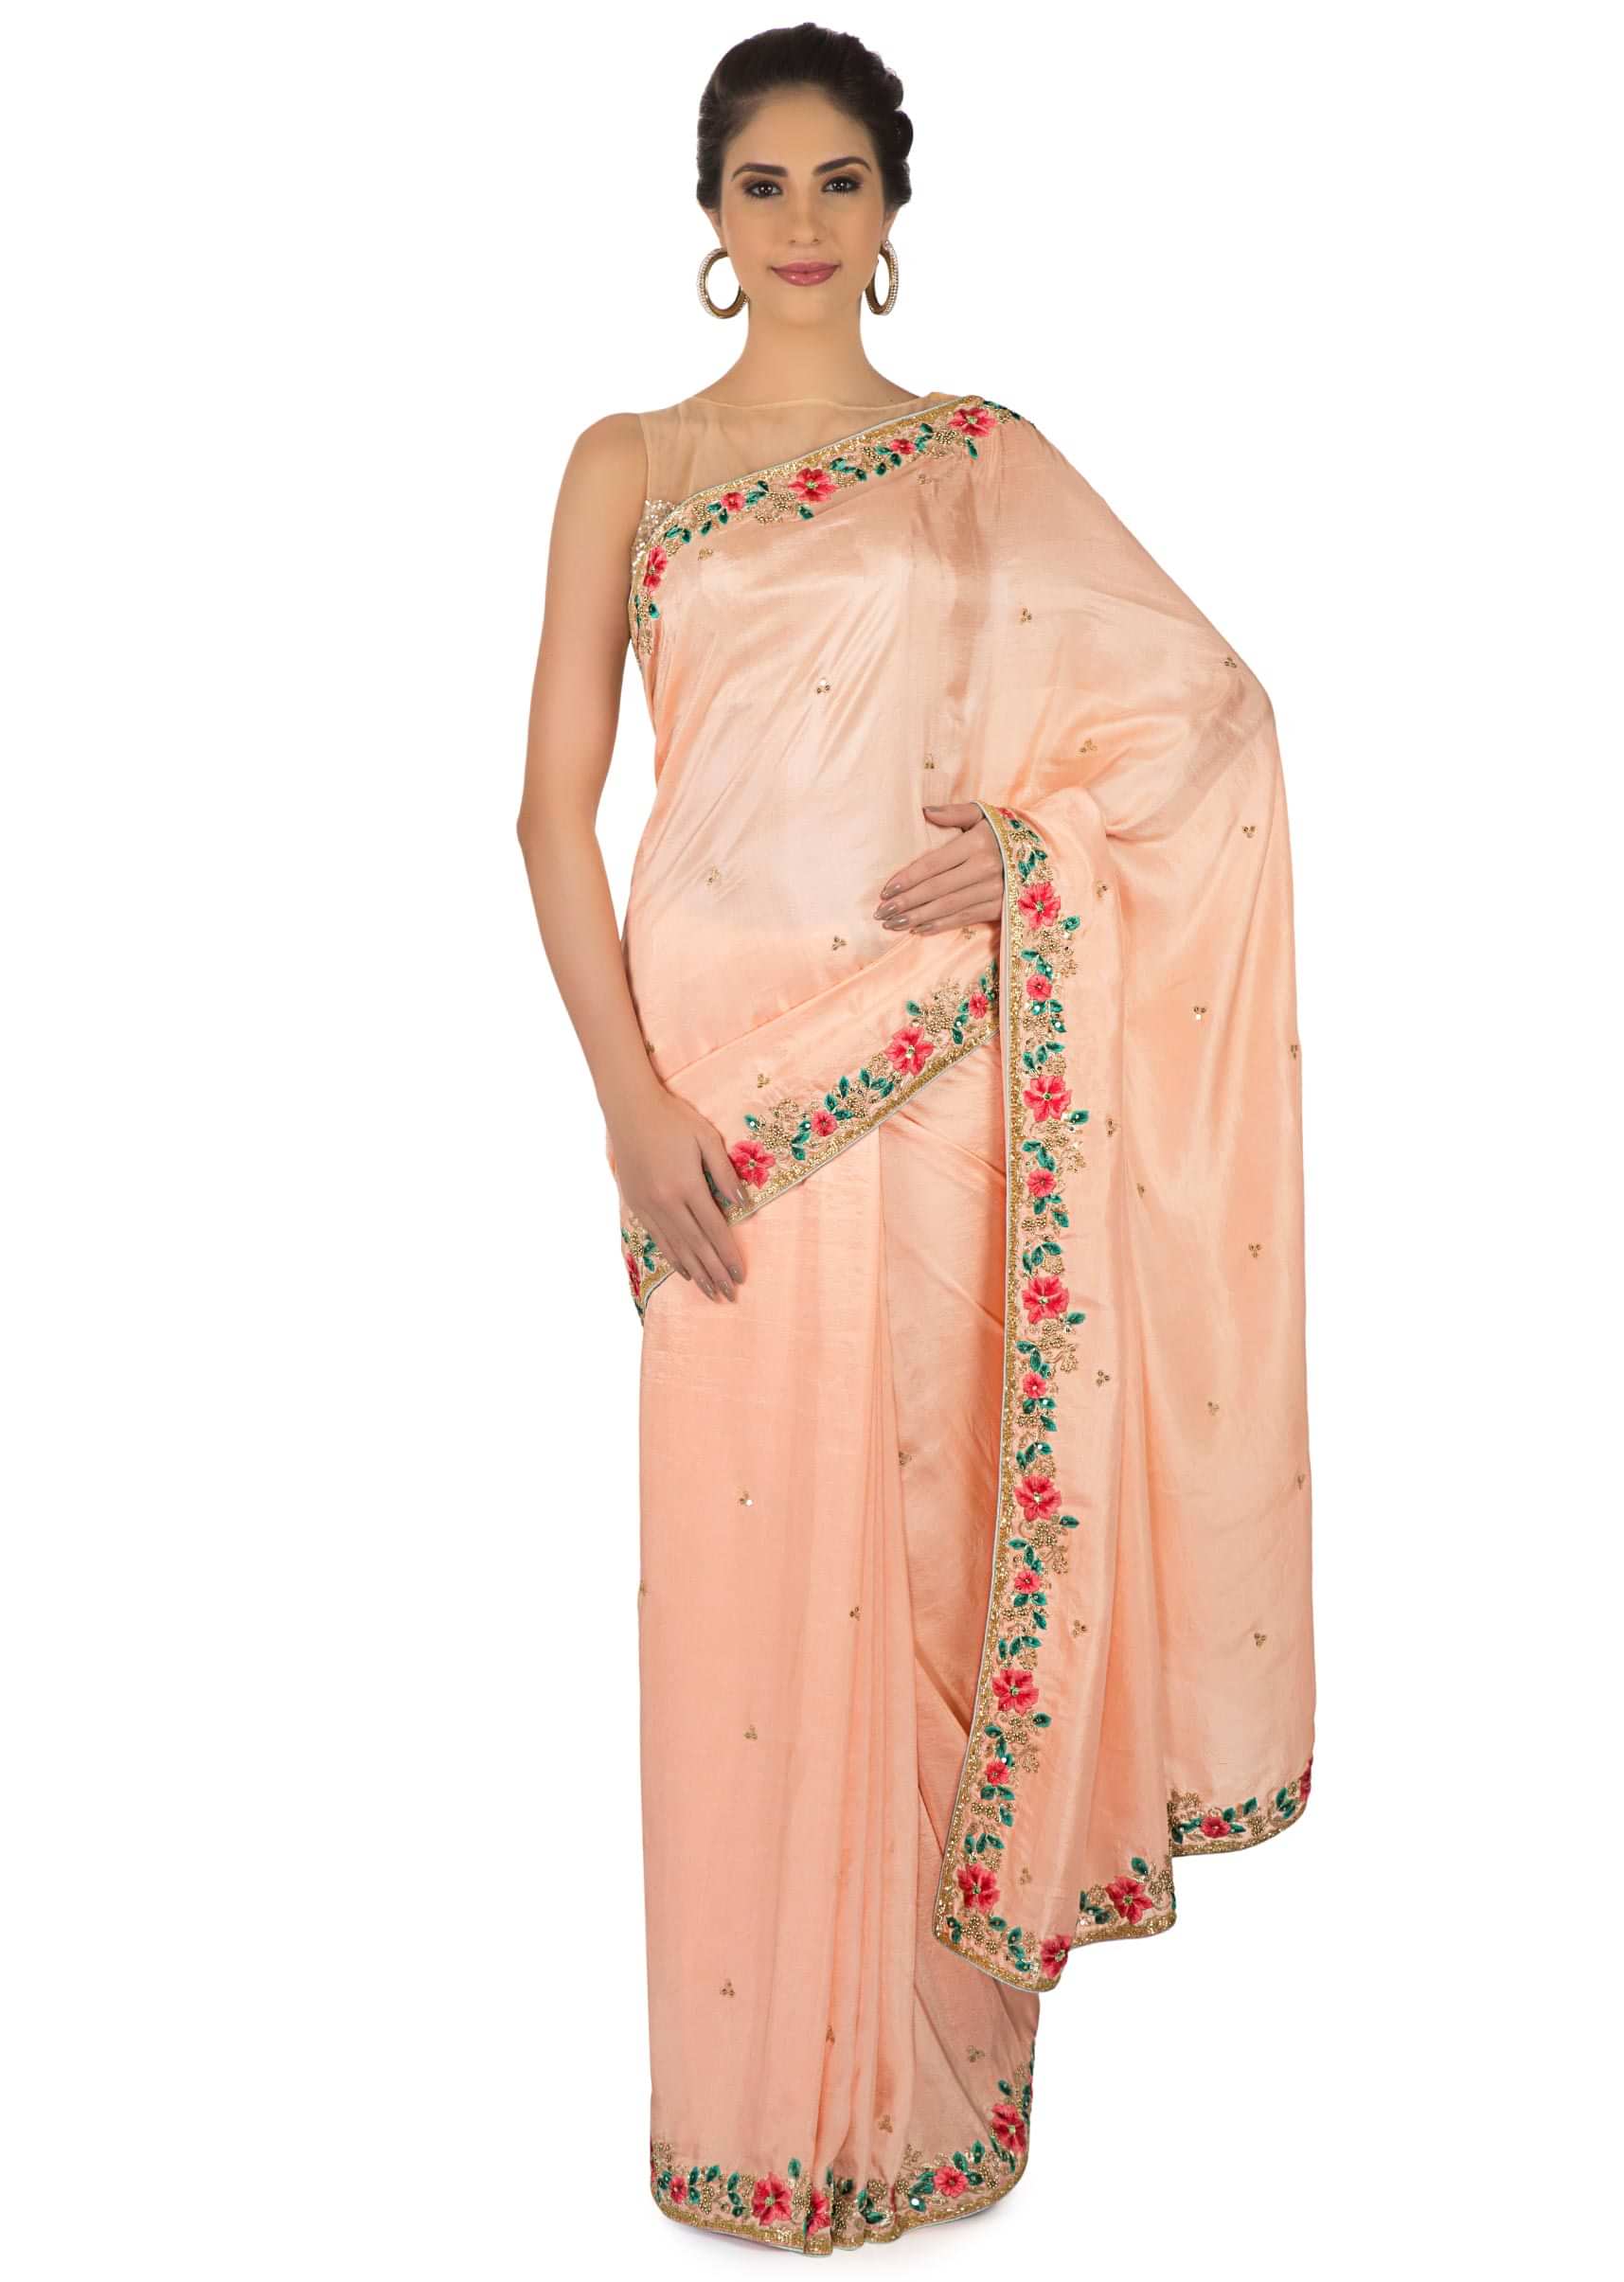 Peach Saree In Satin Embellished In Resham And Moti Embroidery In Floral Motif Online - Kalki Fashion